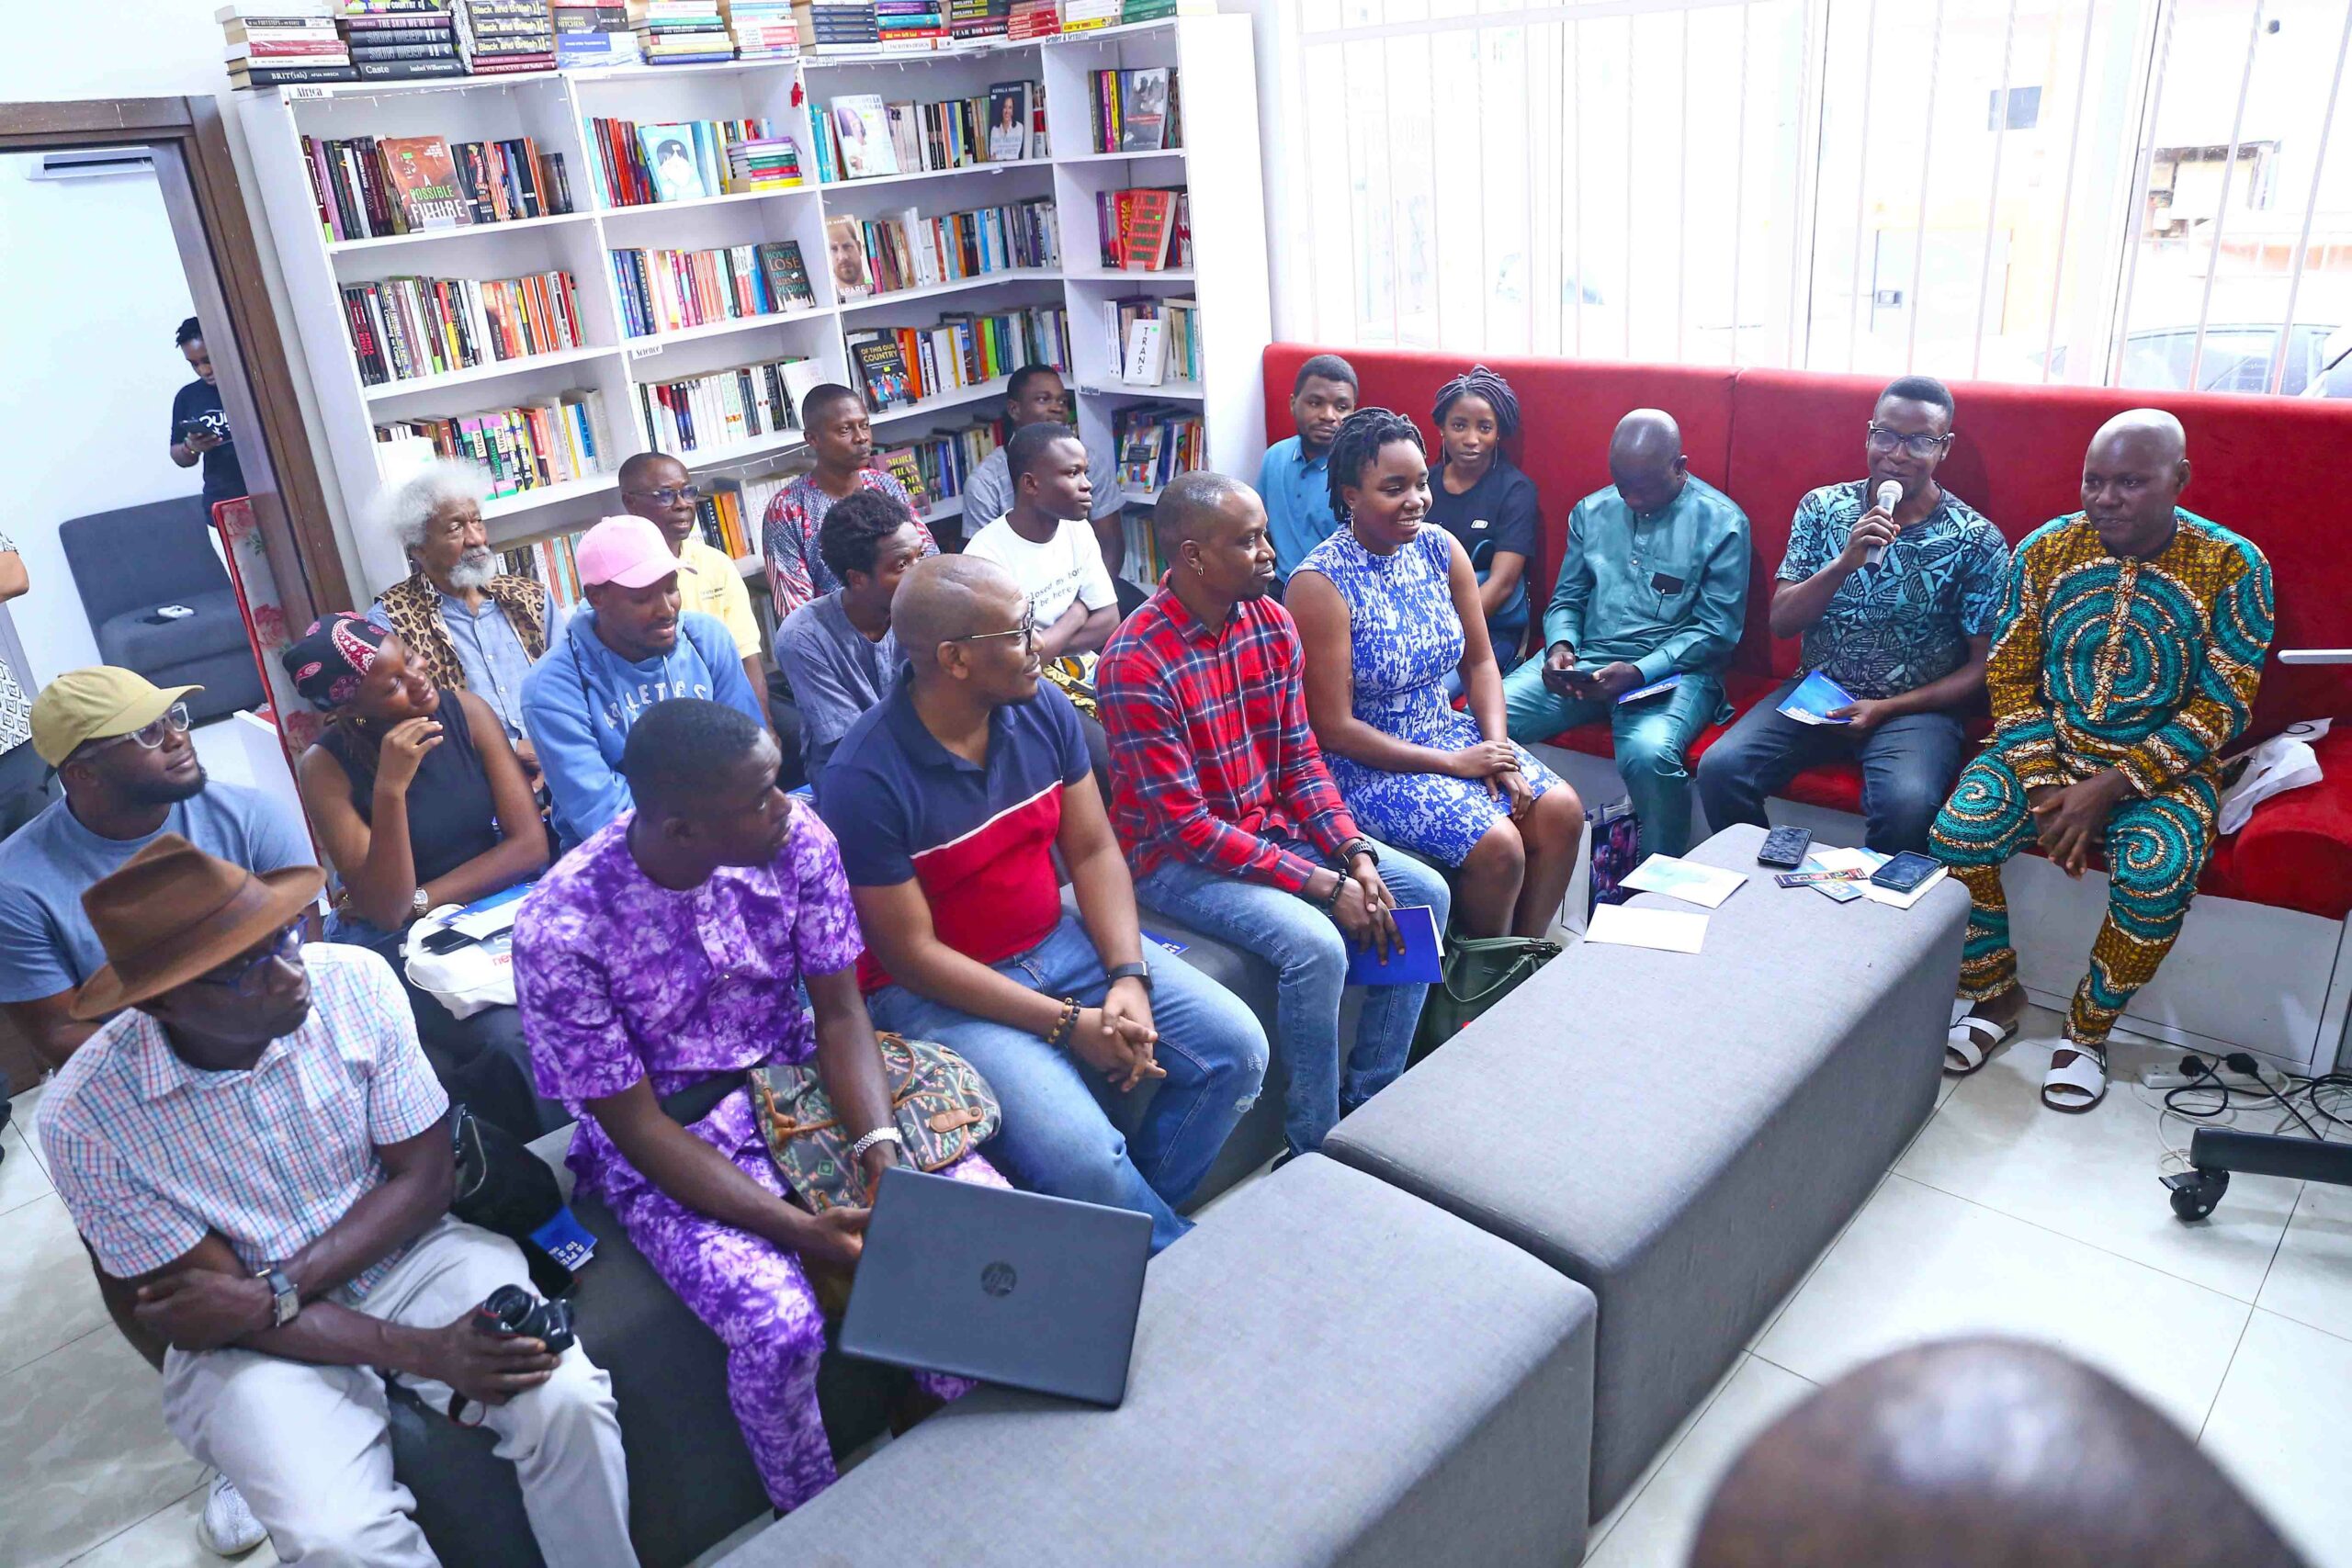 Cross section of Participants at the event